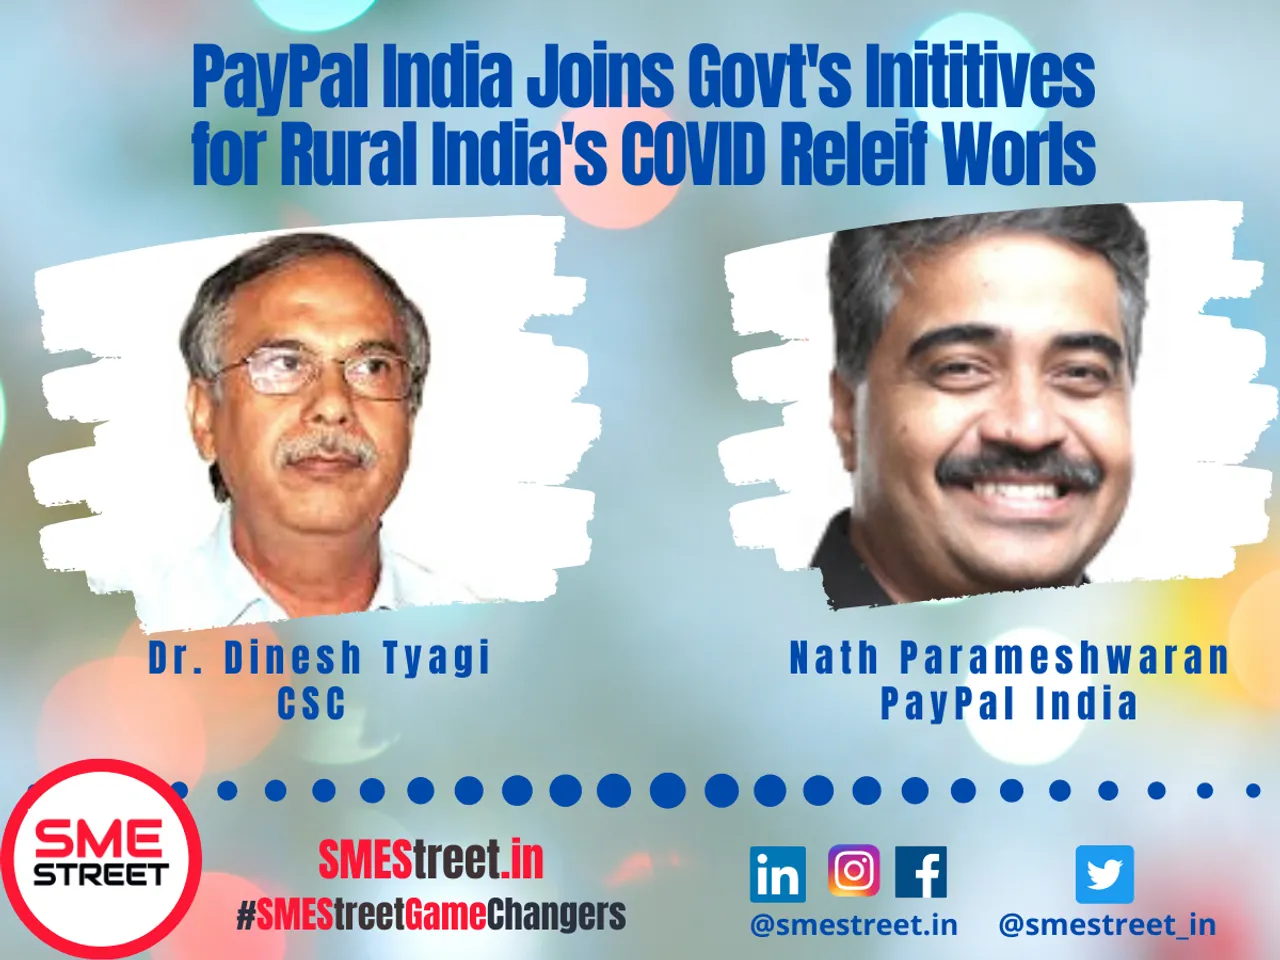 PayPal Partnered With CSC to Extend it's Support to India's COVID Relief Works in Rural India